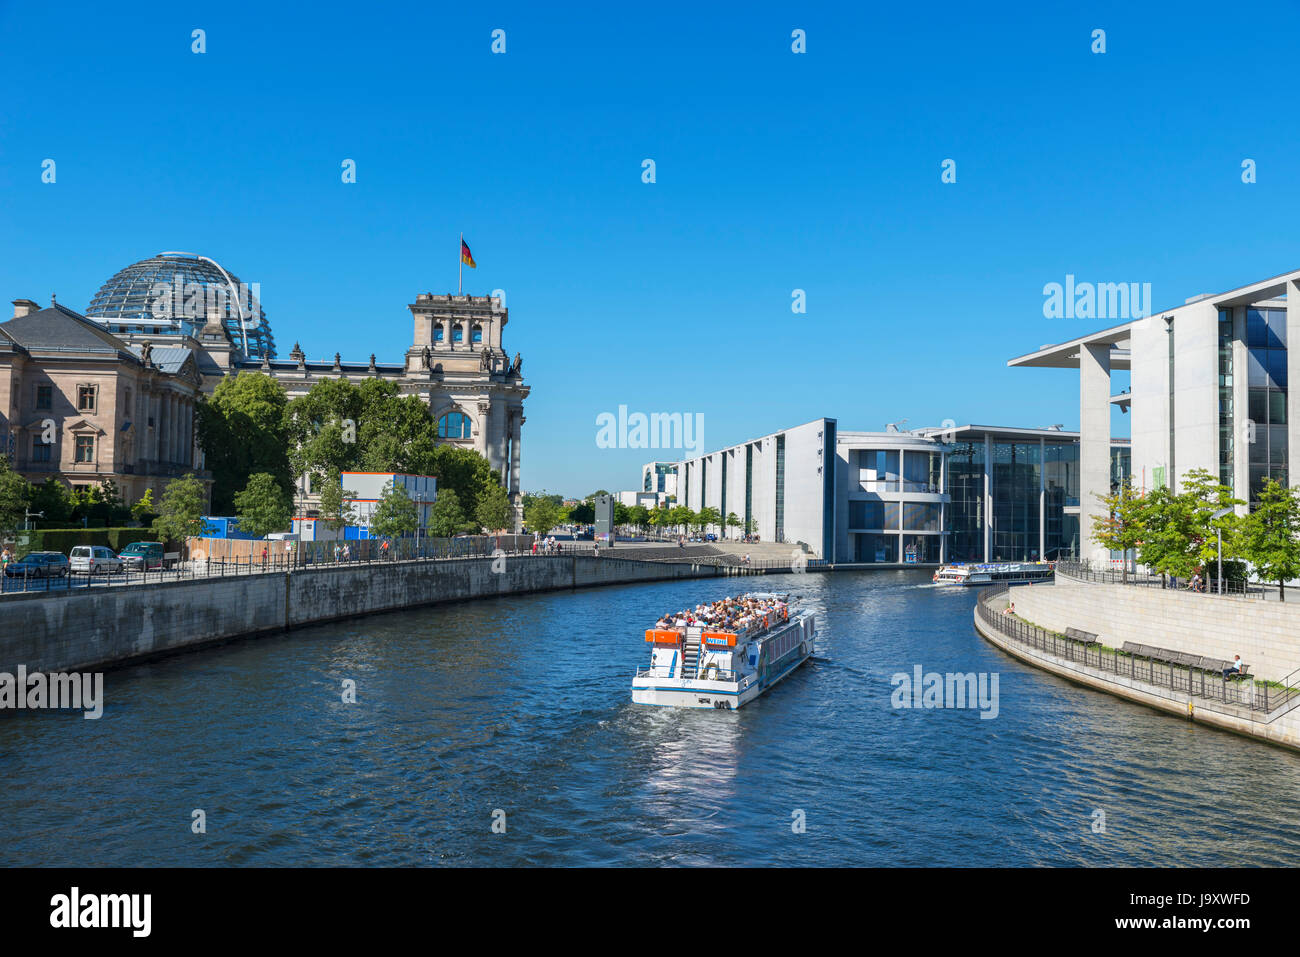 River cruise boat on the Spree River in front of the German parliament buildings, Mitte, Berlin, Germany Stock Photo